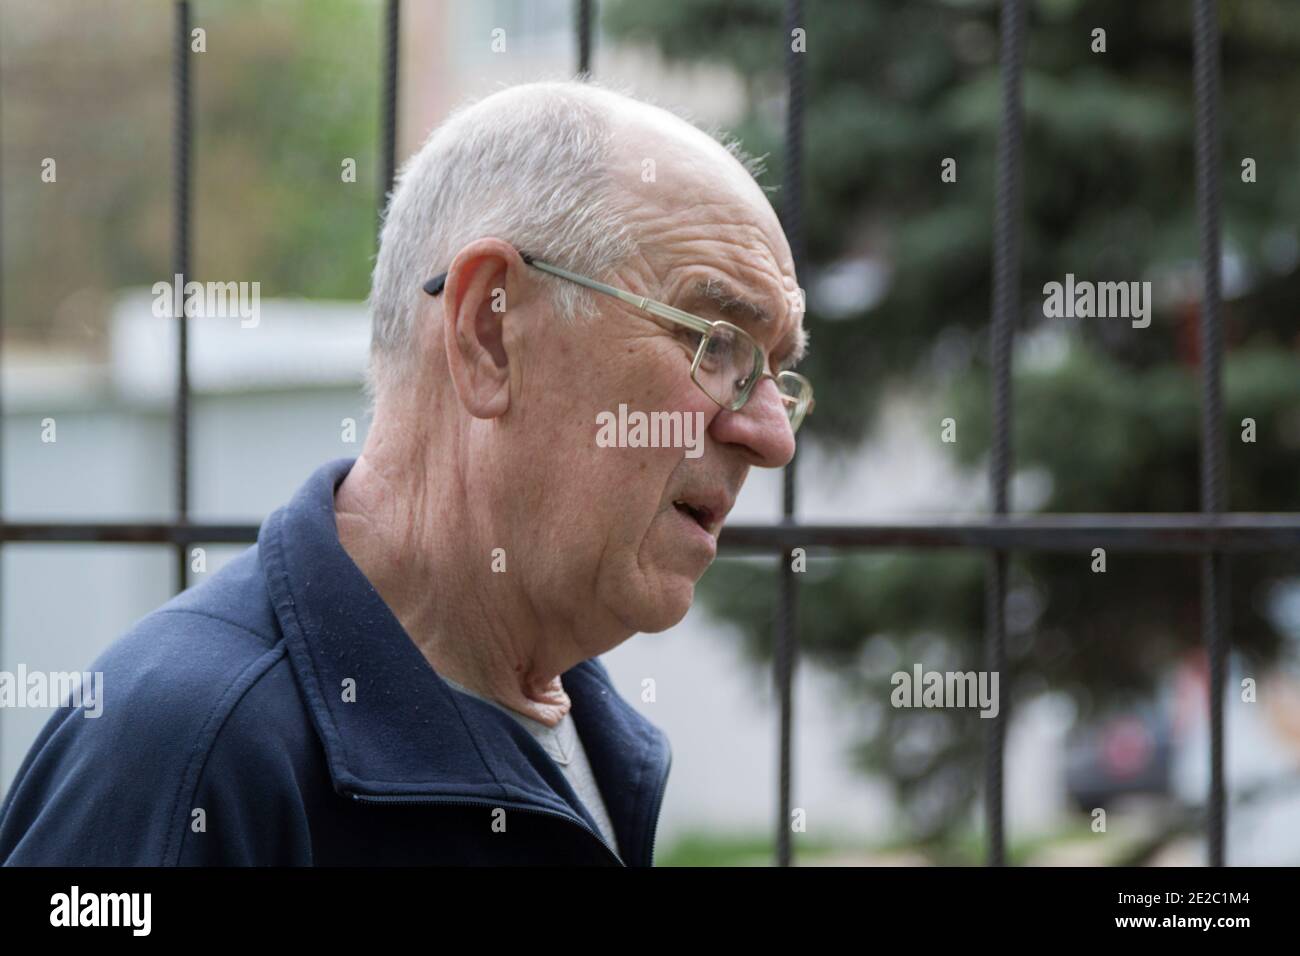 Portrait of an elderly man in profile on the street. The elderly person's face expresses concern and despondency. Close-up. Stock Photo